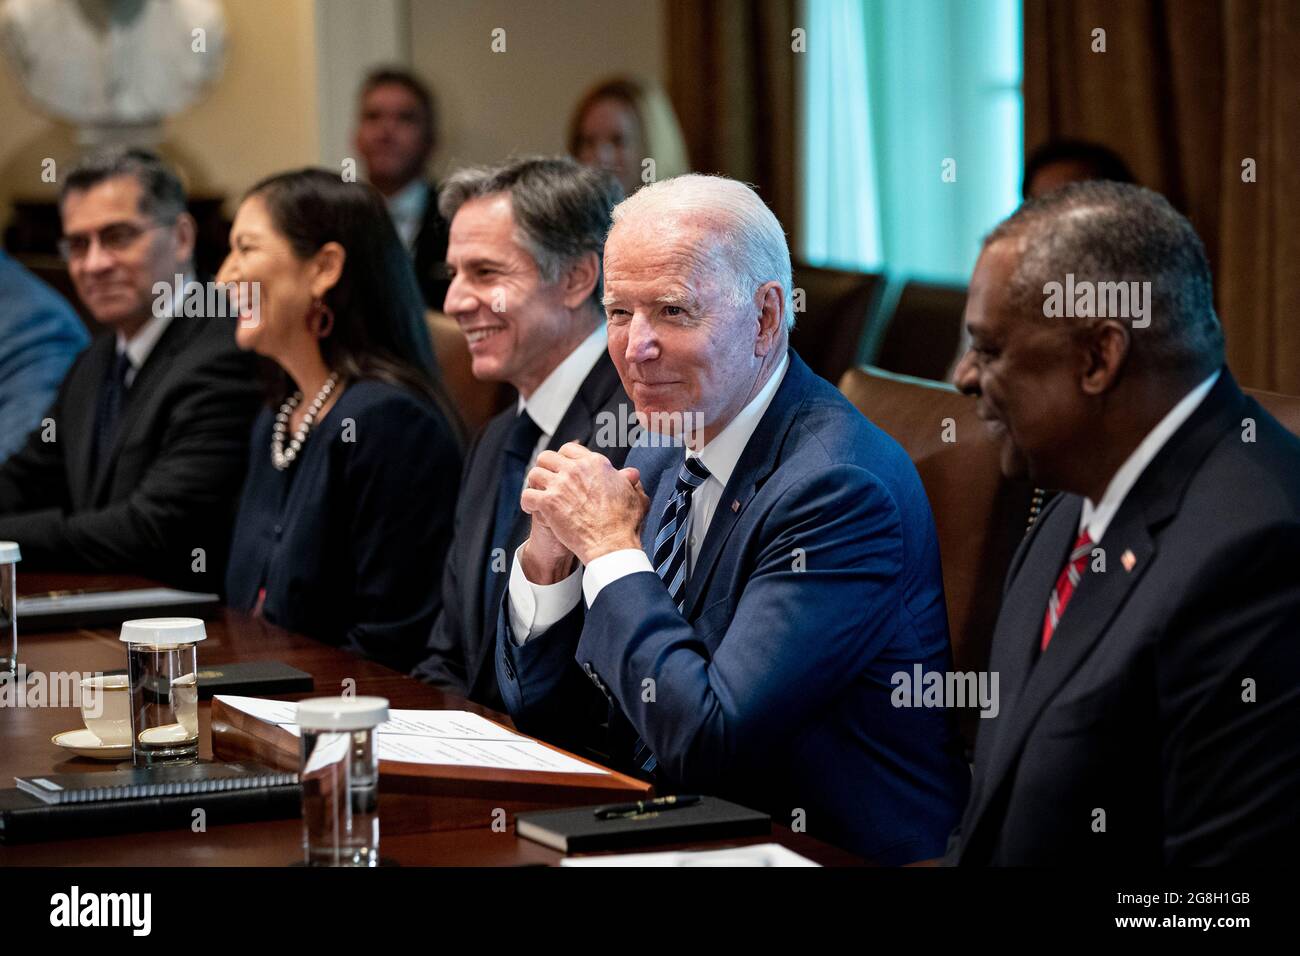 Washington, USA. 20th July, 2021. U.S. President Joe Biden pauses before speaking during a cabinet meeting at the White House in Washington, DC, U.S., on Tuesday, July 20, 2021. Biden administration officials say they're starting to see signs of relief for the global semiconductor supply shortage, including commitments from manufacturers to make more automotive-grade chips for car companies. Photographer: Al Drago/Pool/Sipa USA Credit: Sipa USA/Alamy Live News Stock Photo